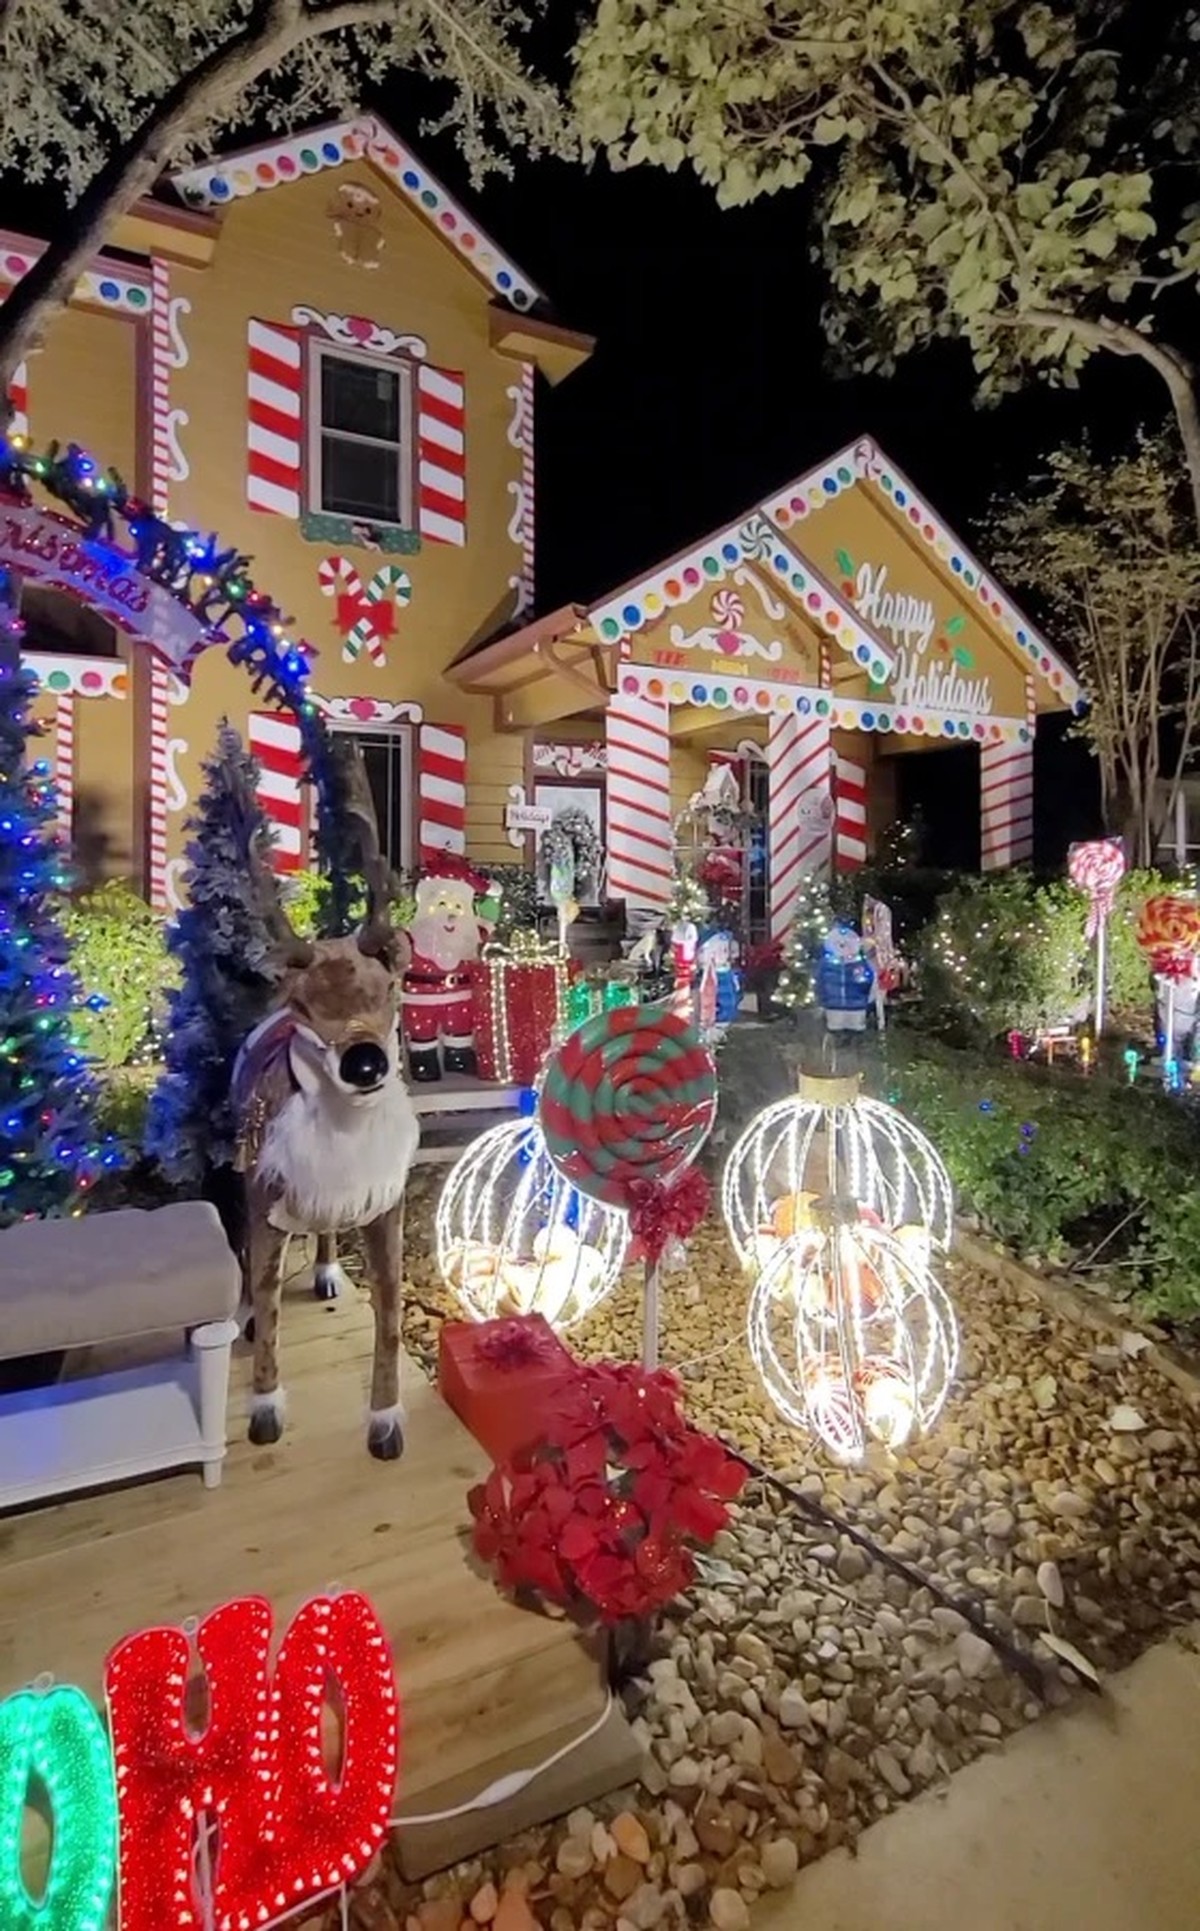 Woman transforms her home into a life-size gingerbread house for Christmas |  birthday